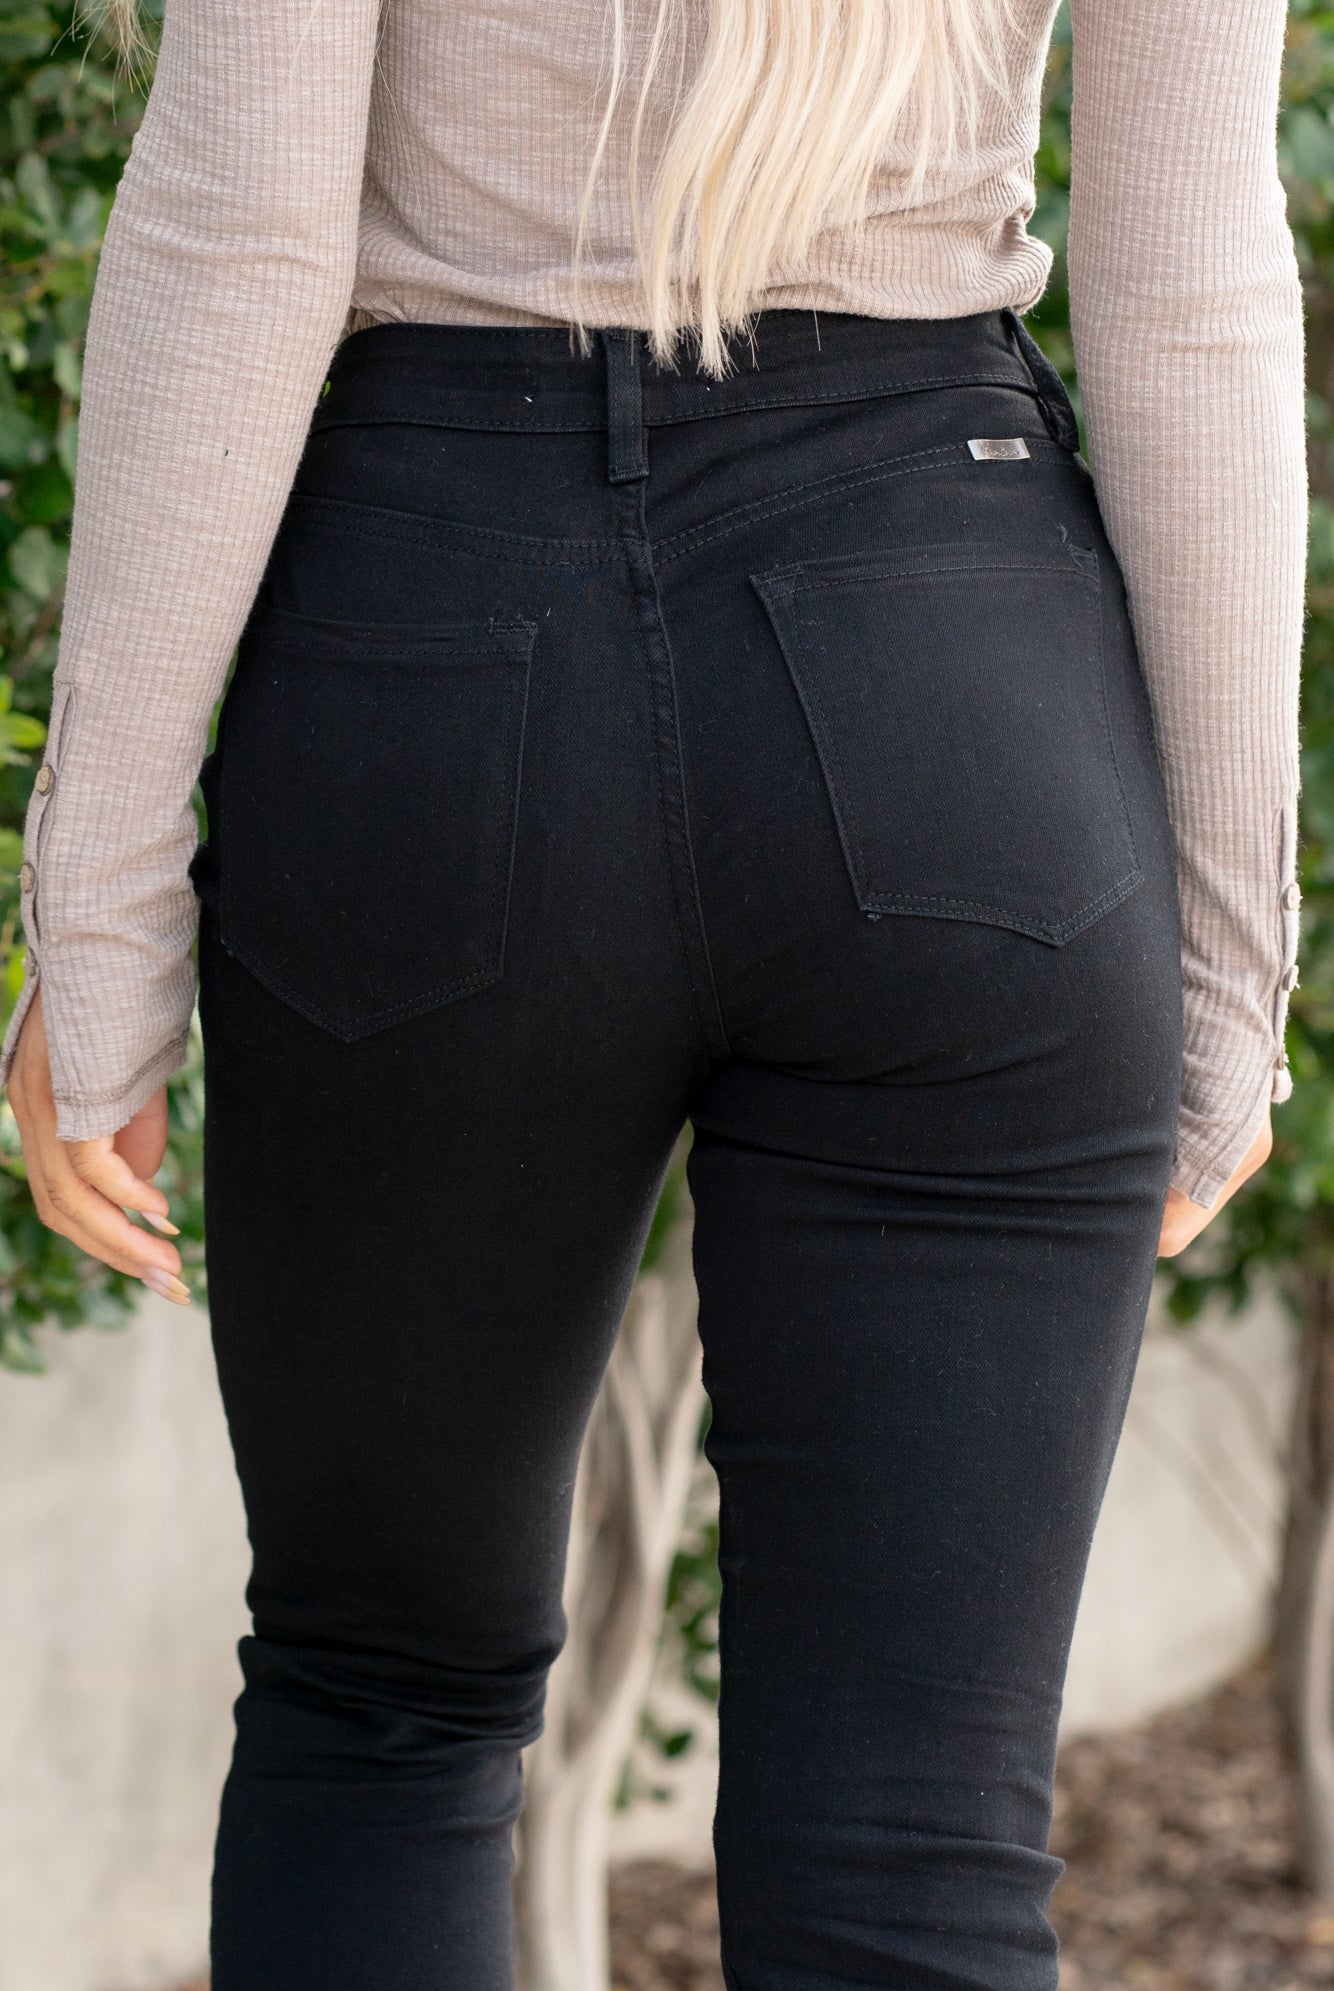 KanCan Jeans  With a high waist and cigarette straight fit, these will be your go-to jeans that will never go out of style. Color: Dark Blue  Cut: Straight Fit, 29" Inseam* Rise: High-Rise, 10.5" Front Rise* 75%COTTON, 23%TENCEL 2%SPANDEX Fly: Zipper Style #: KC11251BK Contact us for any additional measurements or sizing.    *Measured on the smallest size, measurements may vary by size. 